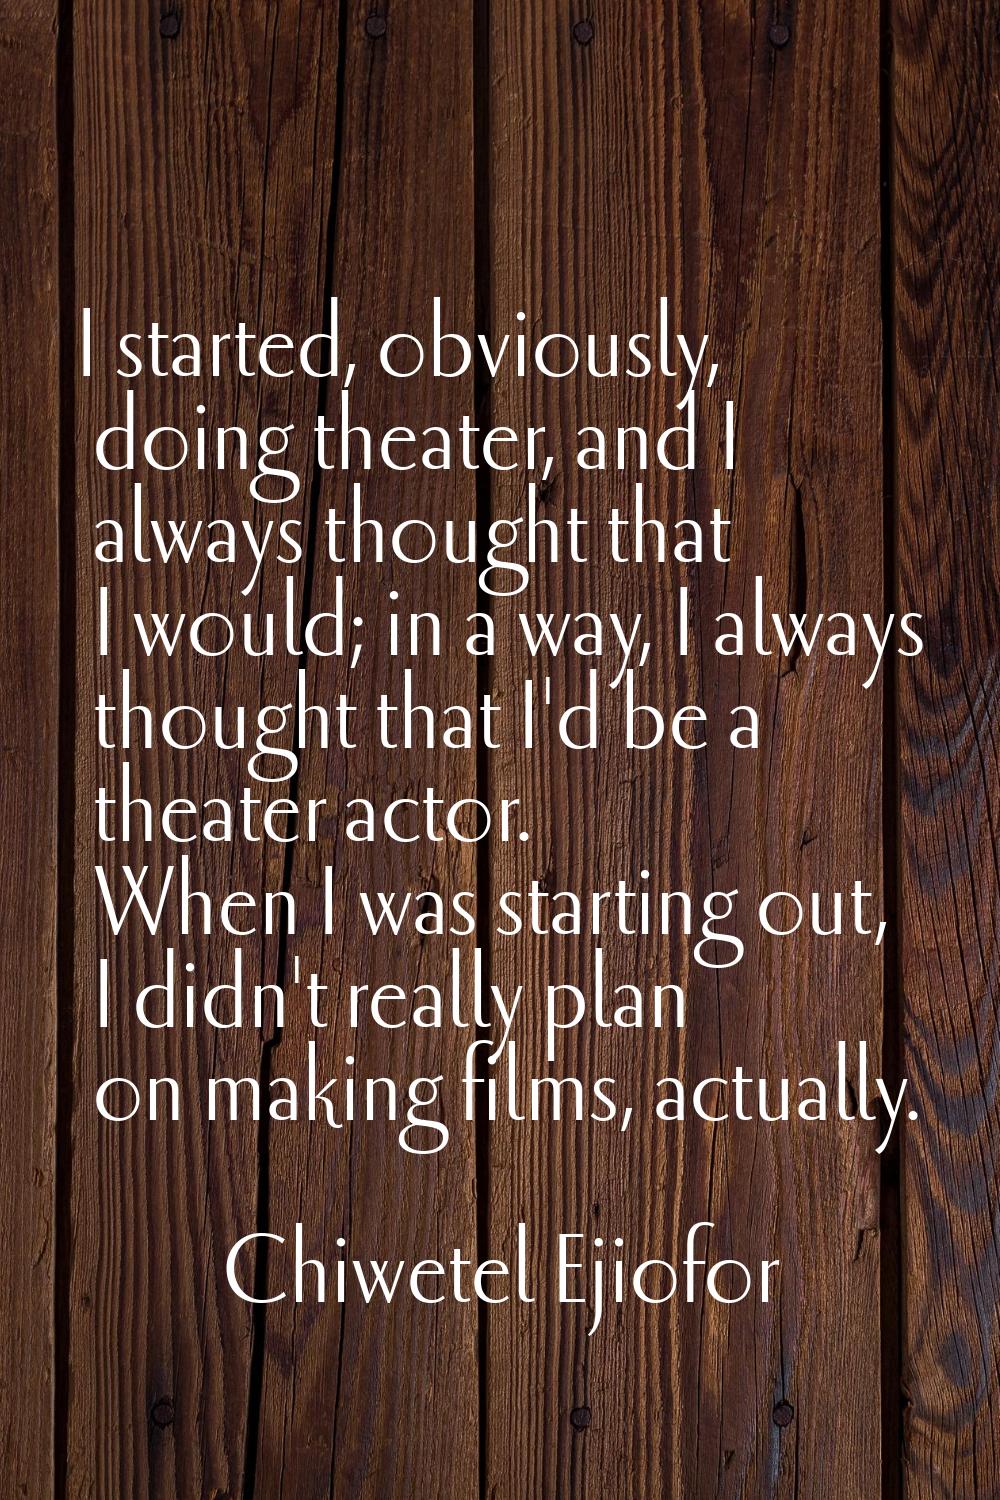 I started, obviously, doing theater, and I always thought that I would; in a way, I always thought 